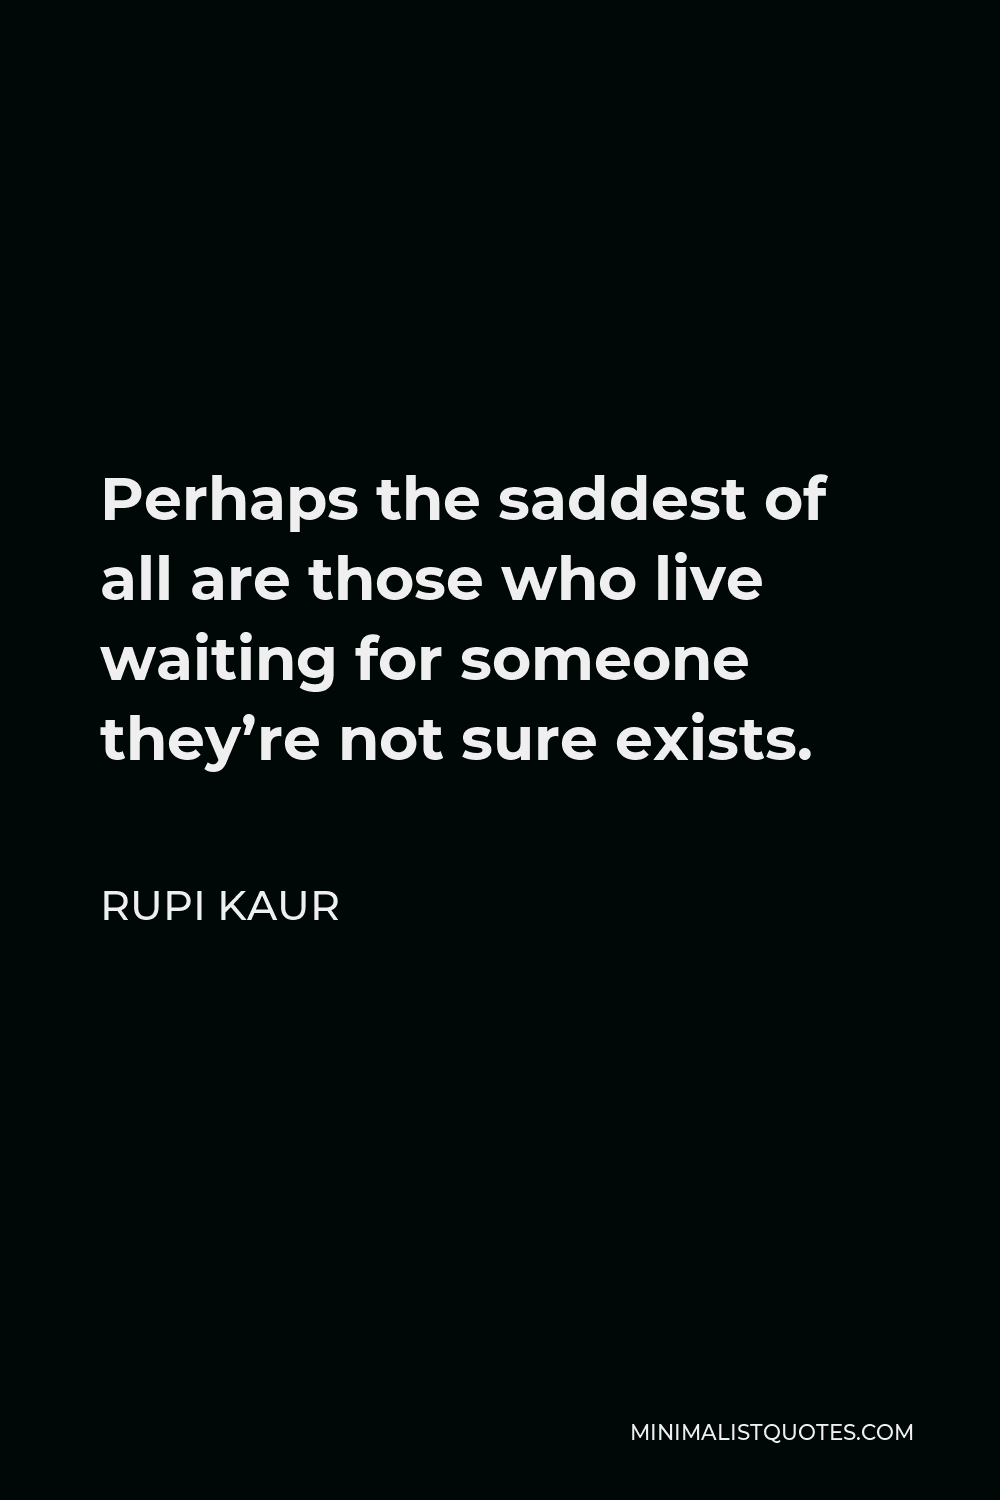 Rupi Kaur Quote - Perhaps the saddest of all are those who live waiting for someone they’re not sure exists.